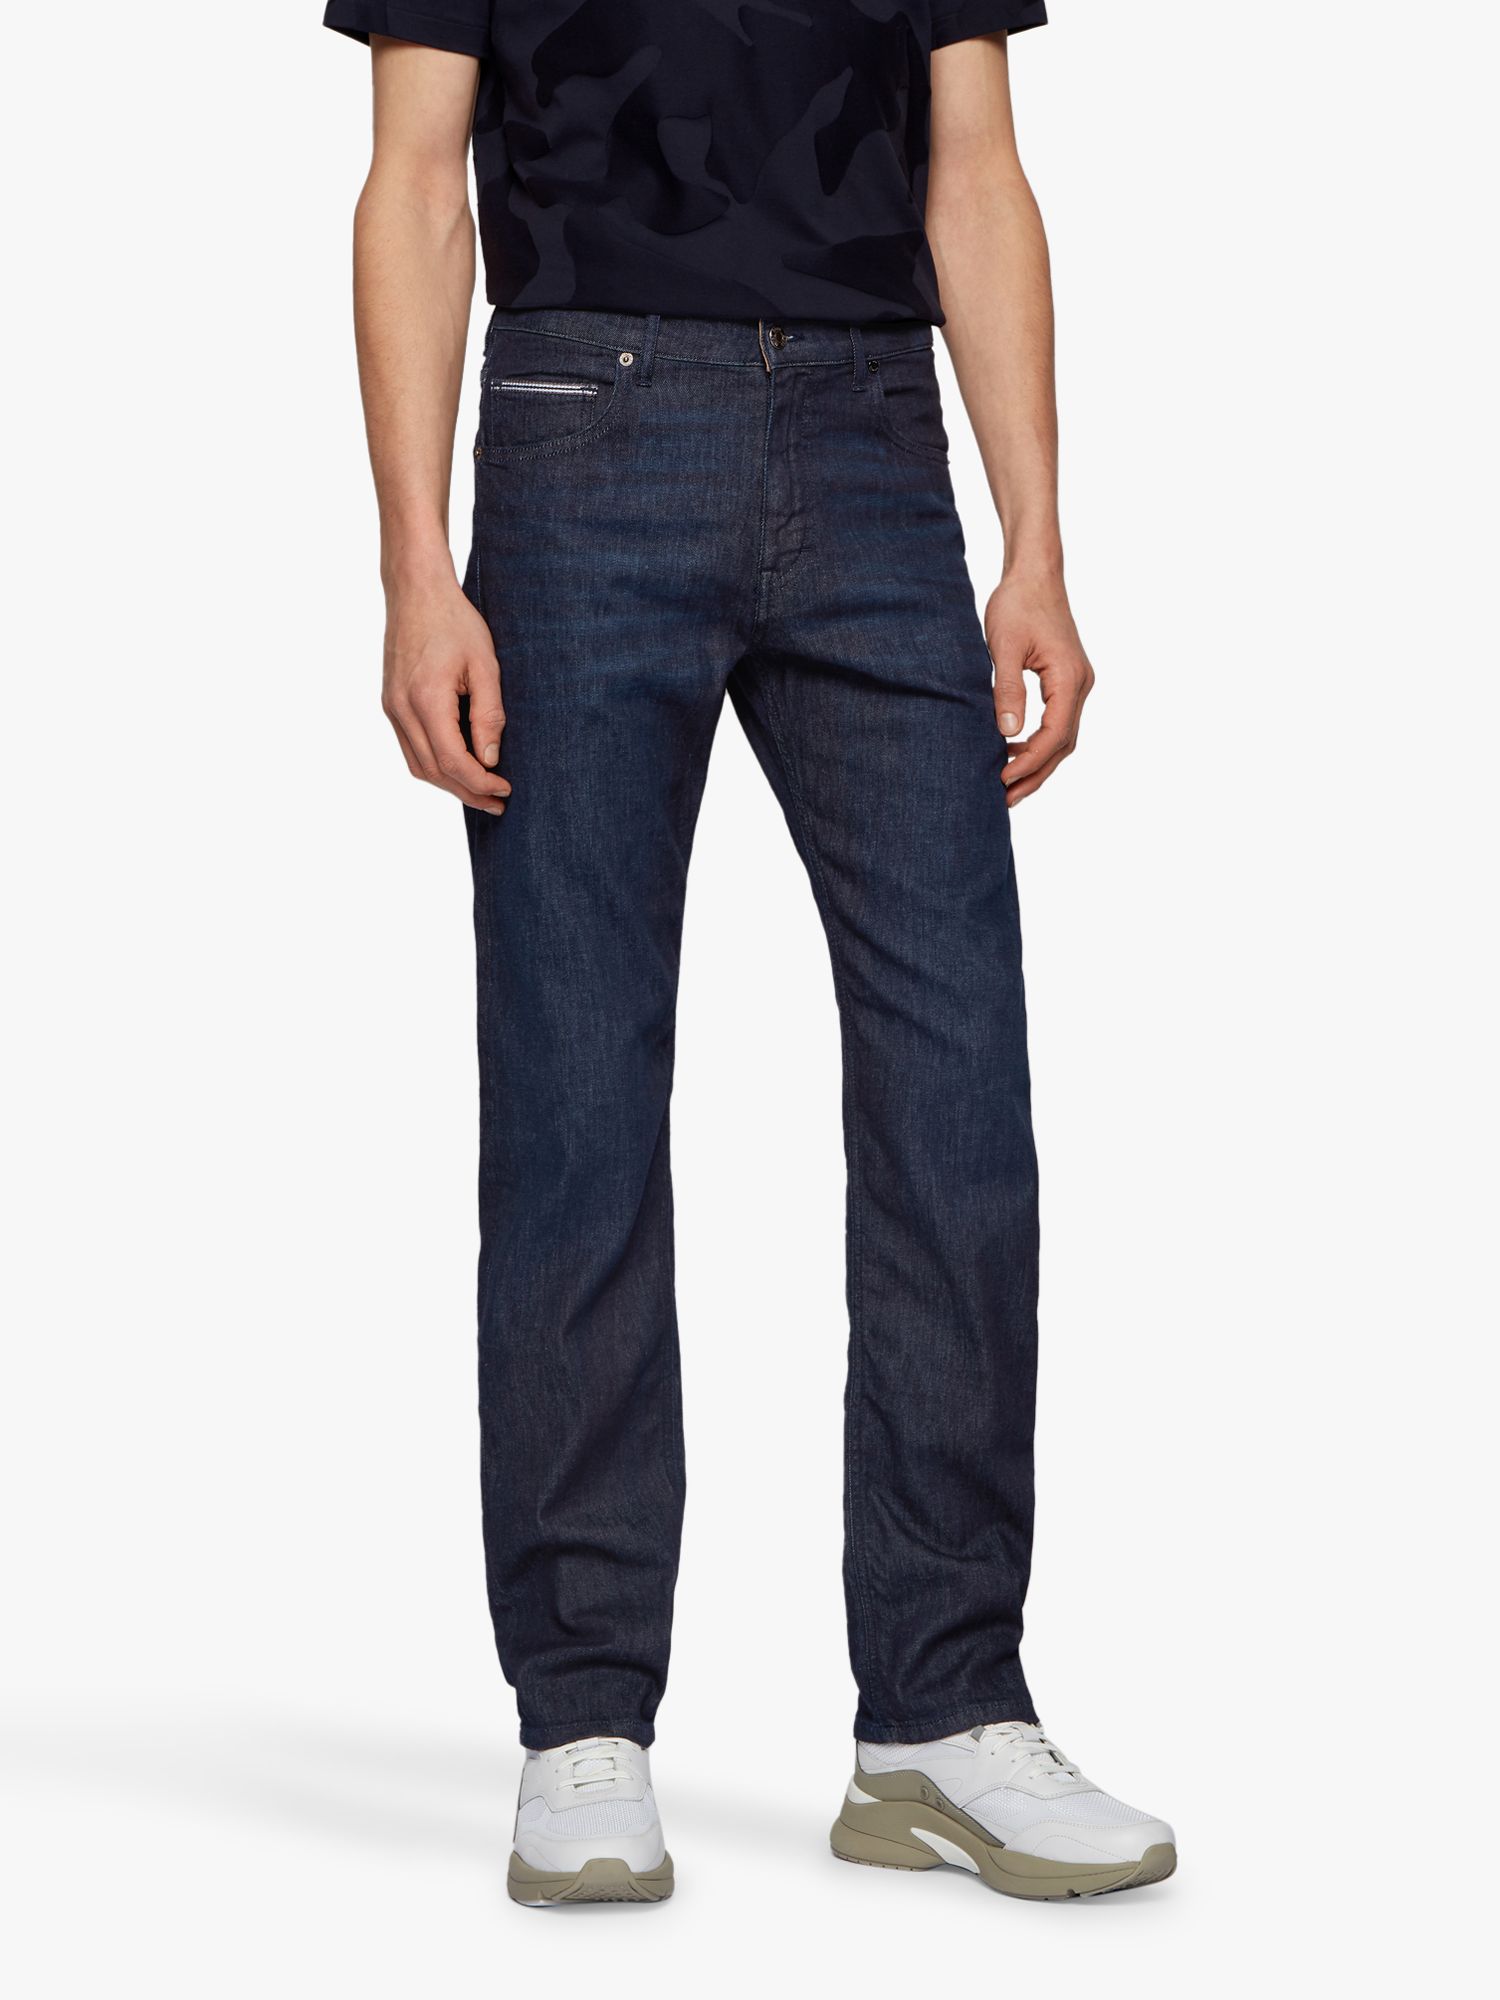 BOSS Albany Straight Fit Jeans, Navy